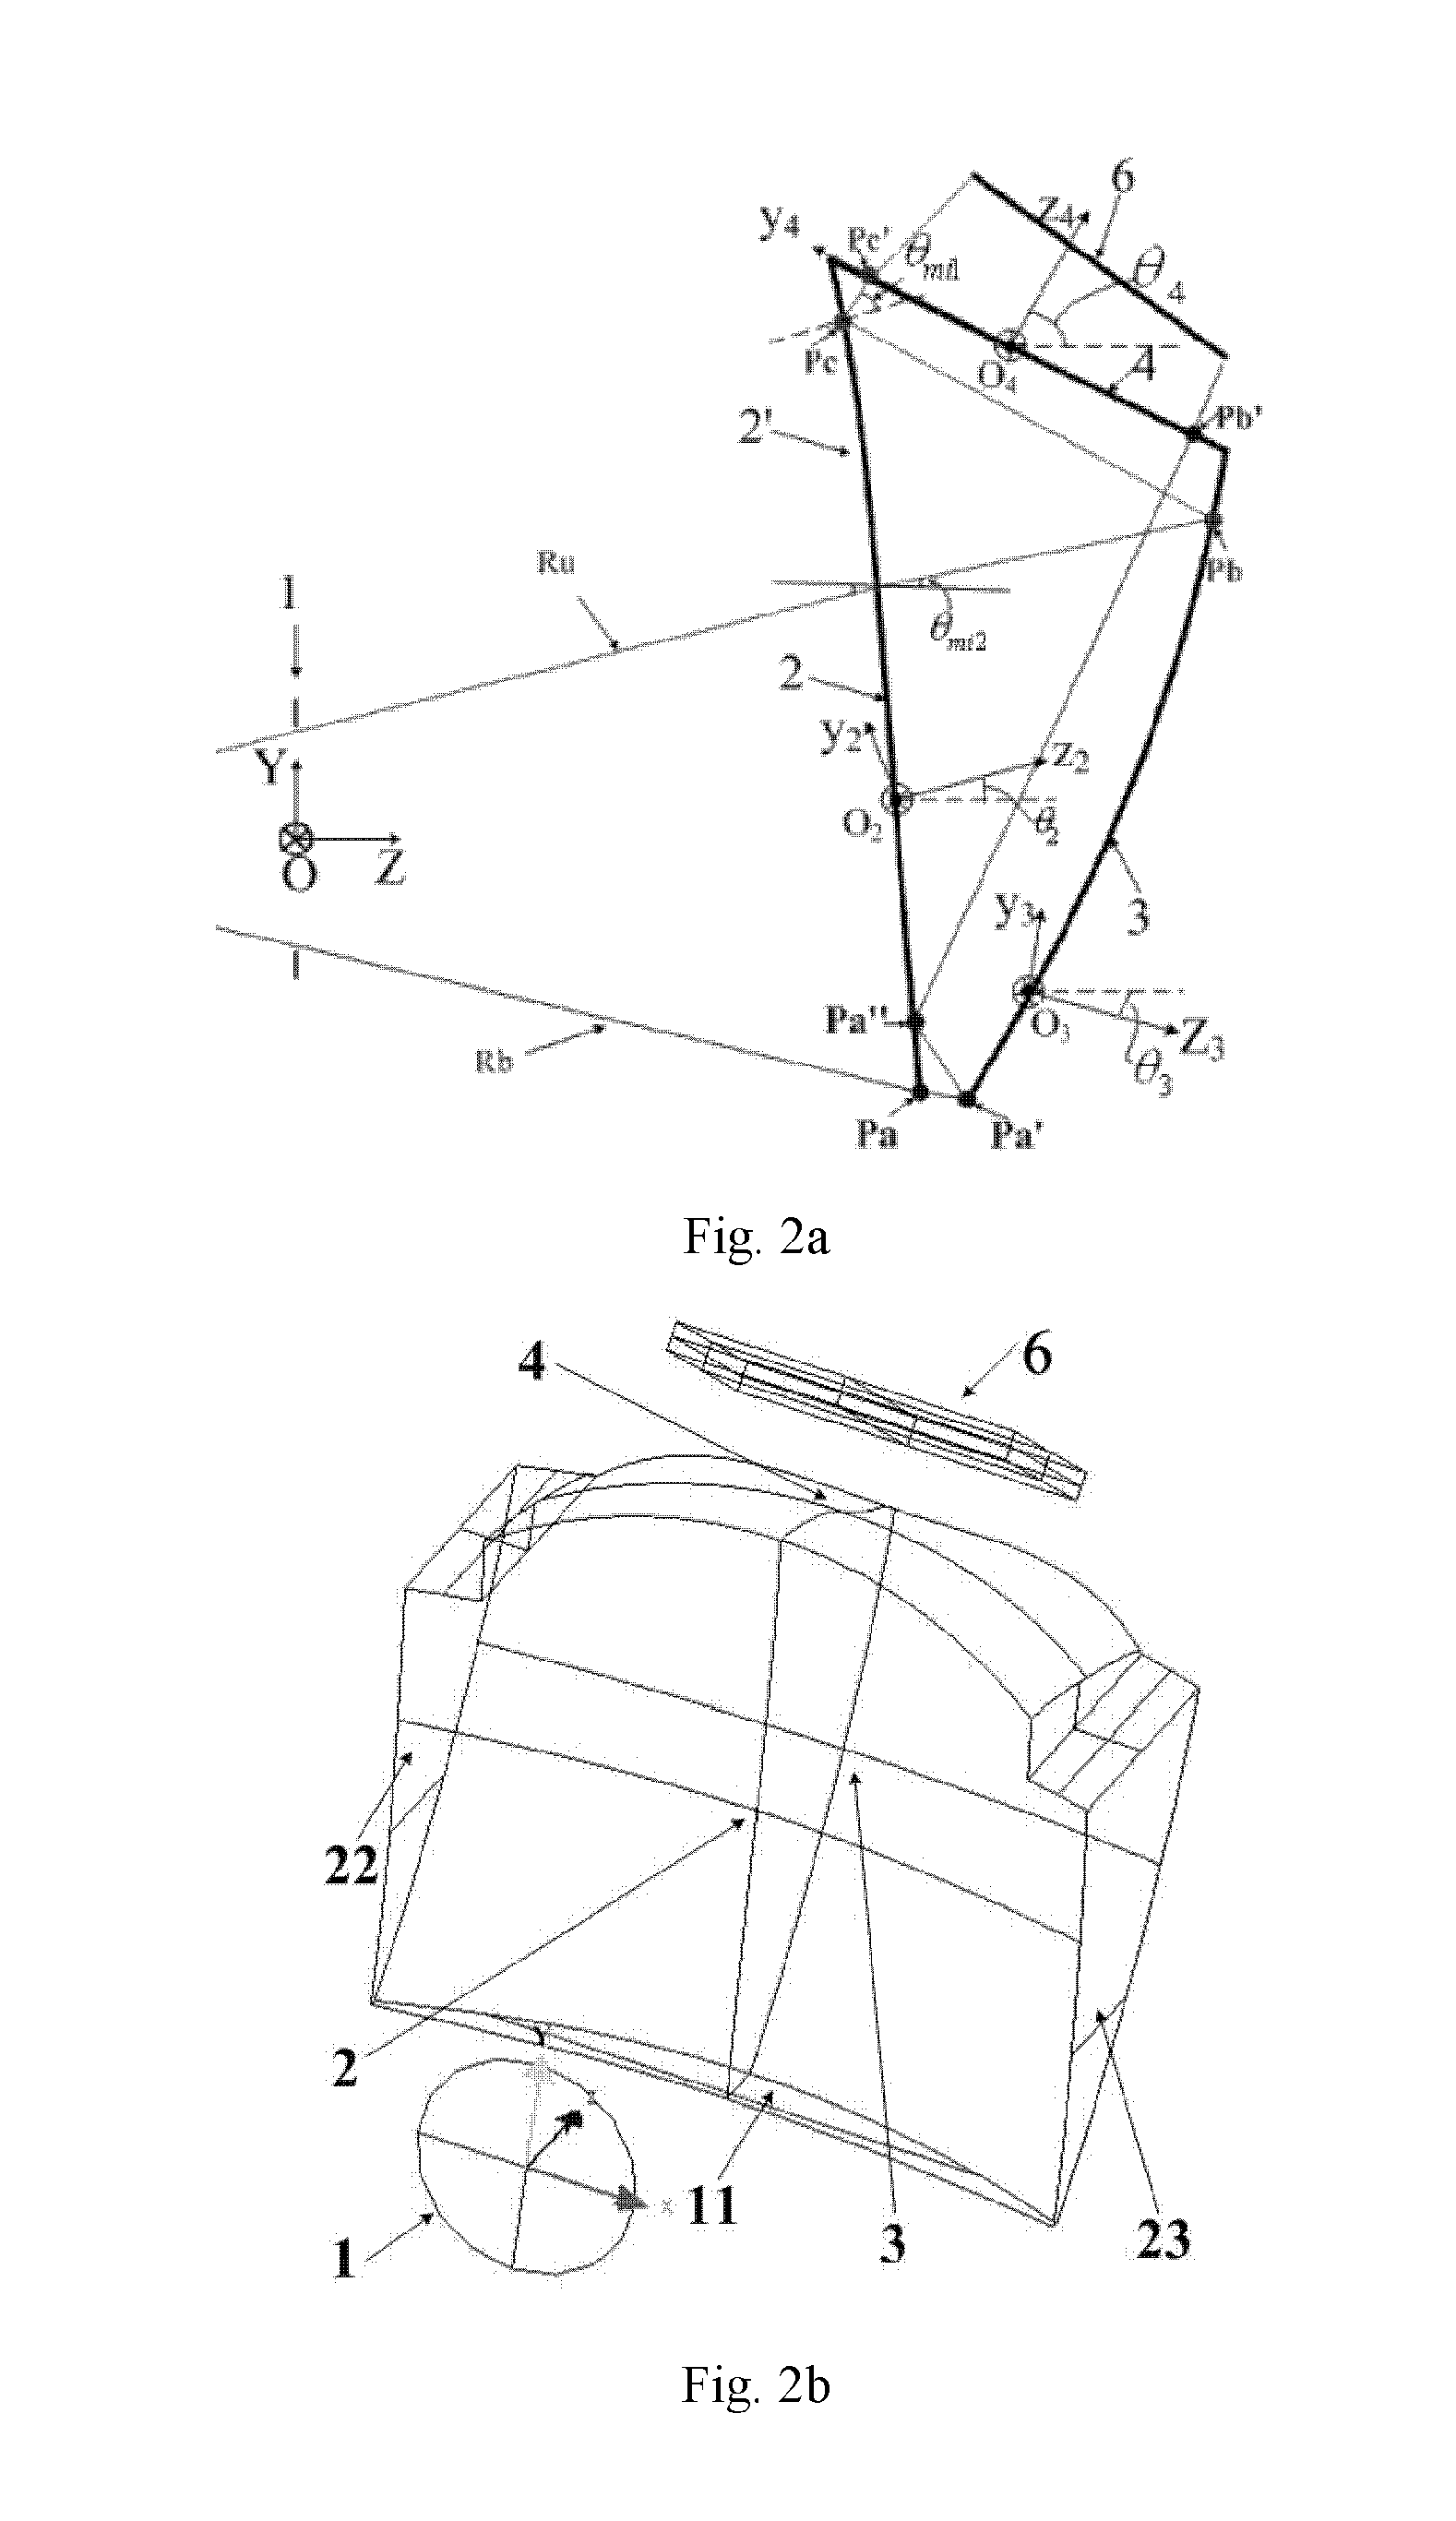 Wide angle and high resolution tiled head-mounted display device